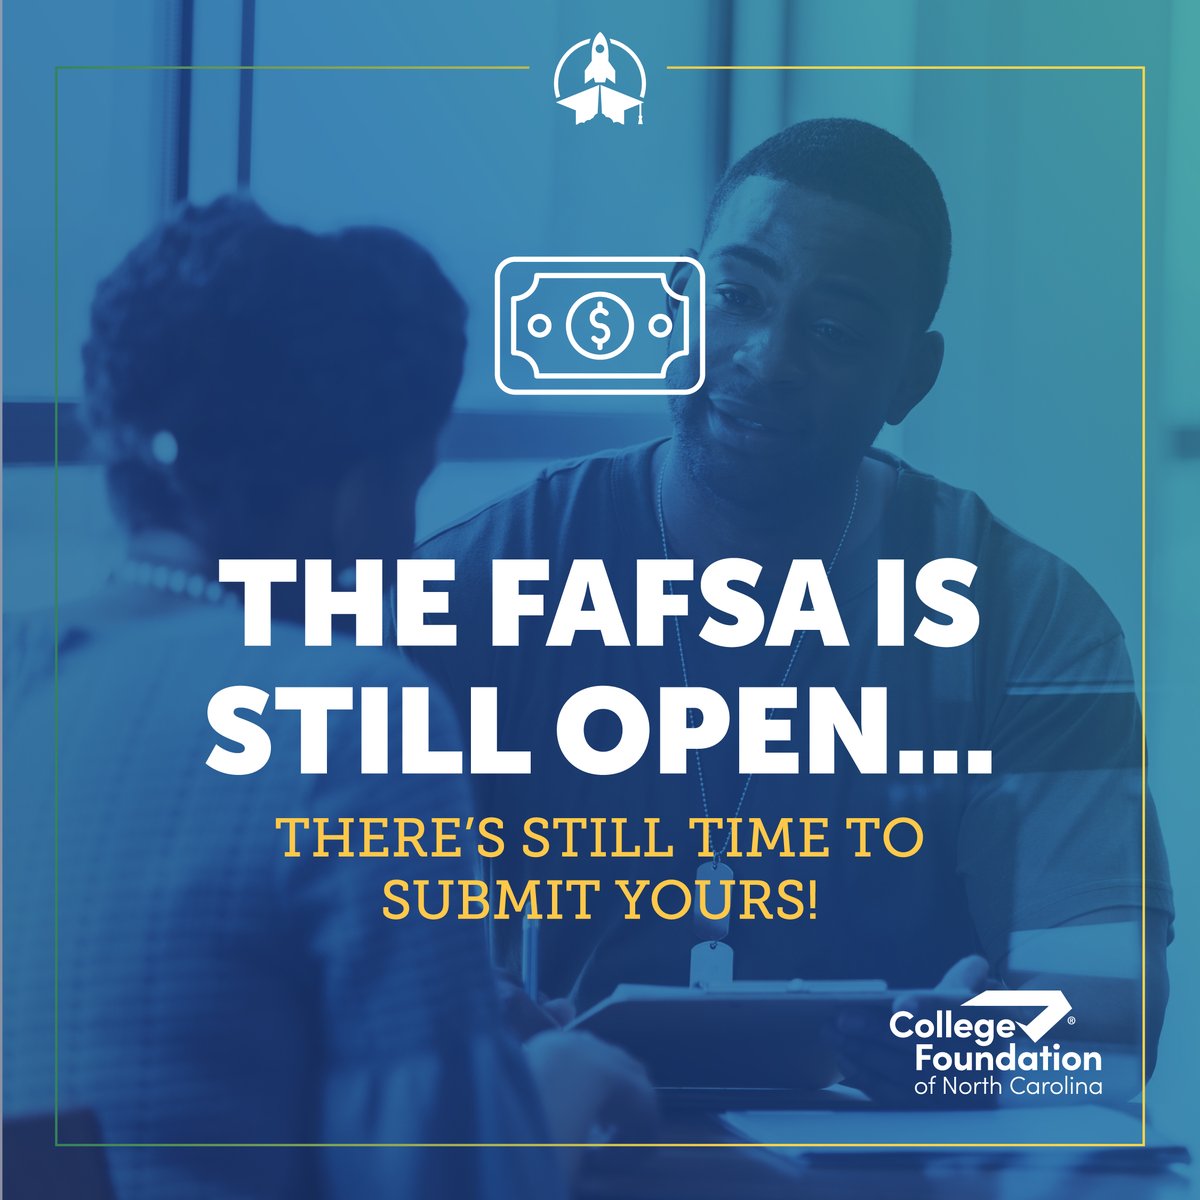 Graduating students: make sure to fill out your @FAFSA! NC has set a goal to have 2 million residents attain a degree or industry-valued credential by 2030. Filling out your FAFSA is a critical step in this process: bit.ly/3Q7HOEr
#2MillionBy2030 #WorkforceDev